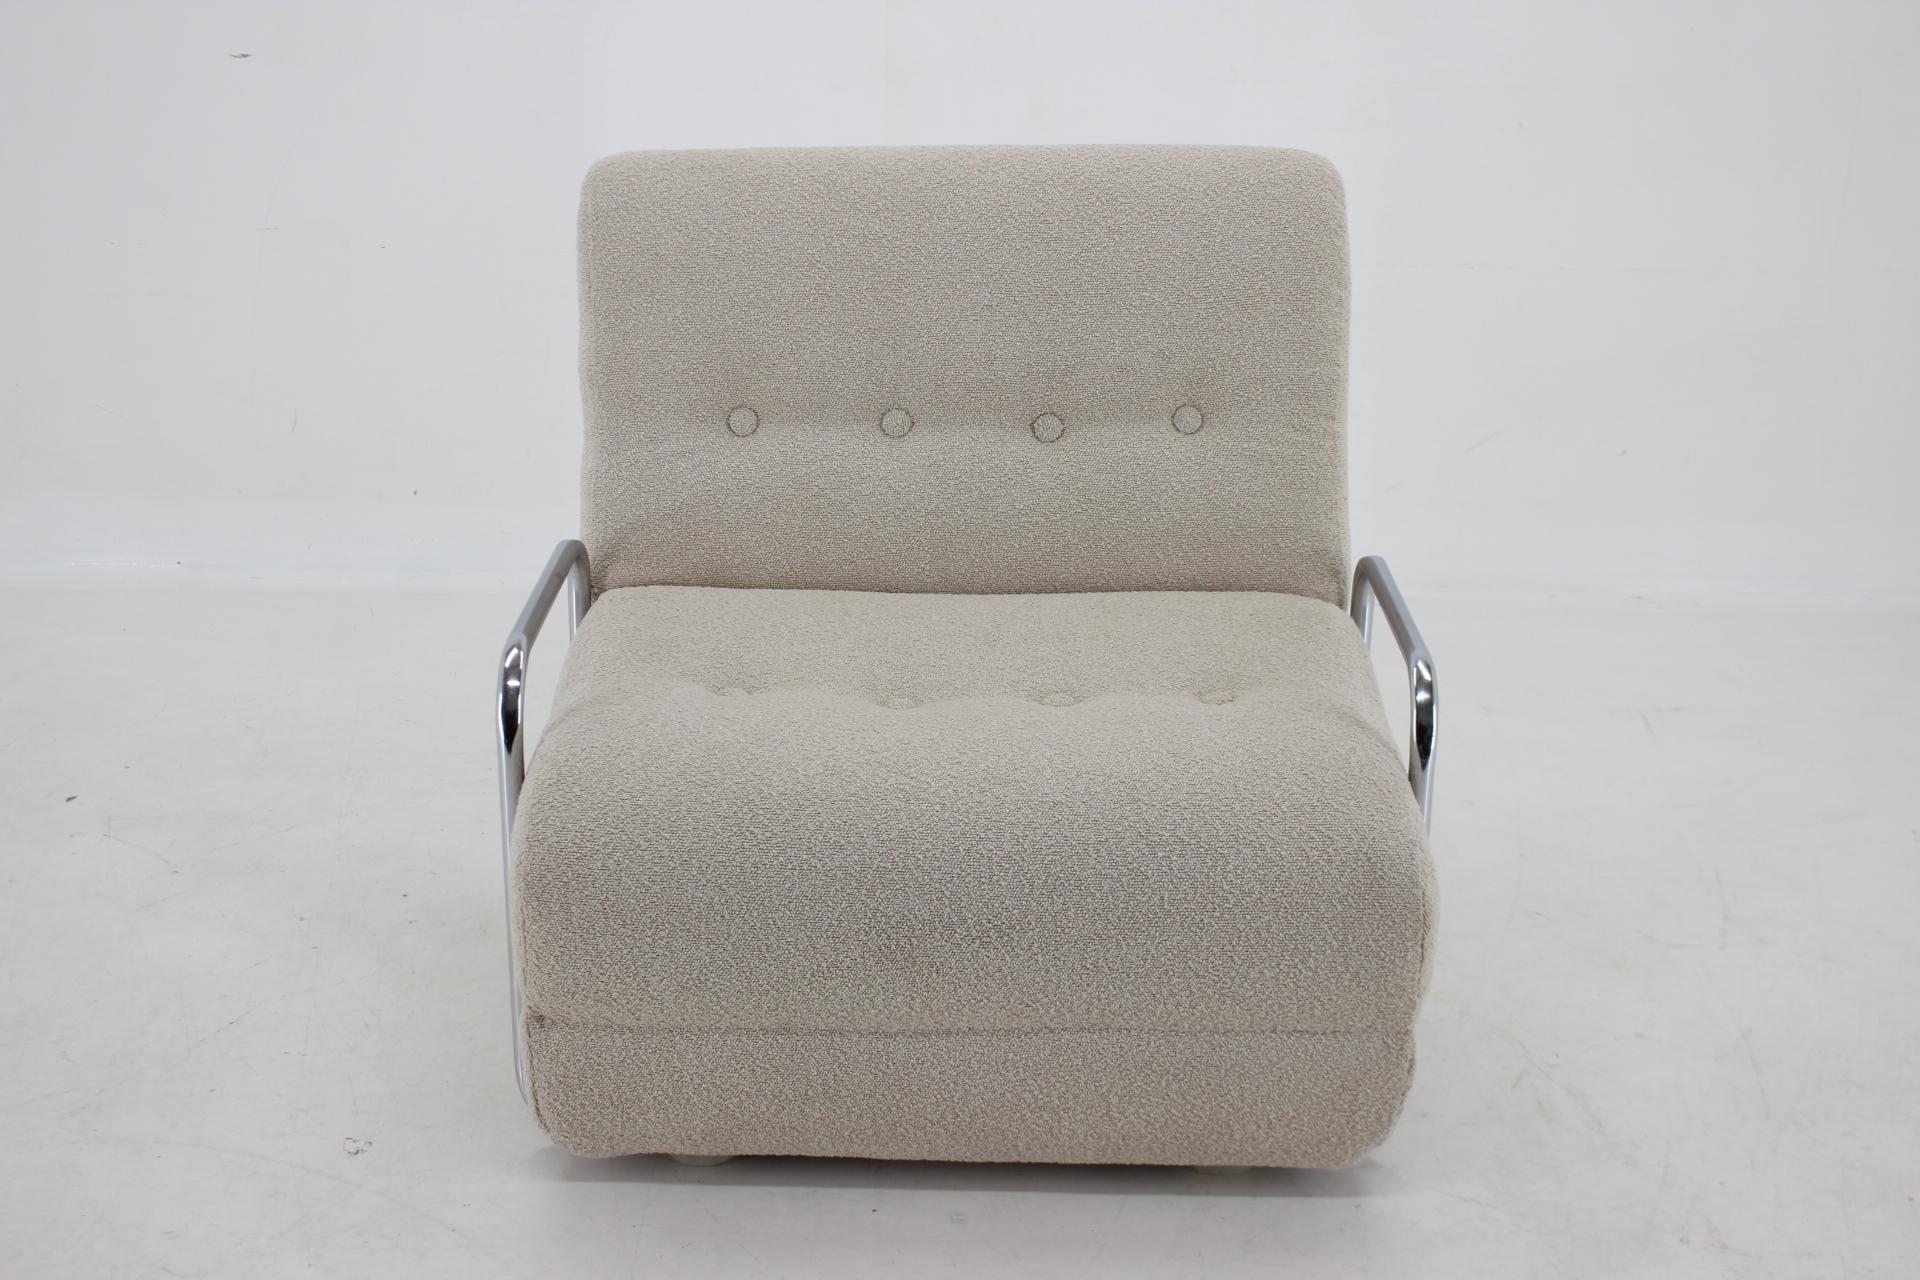 - convertible to bed - lenght 188 cm, height 22 cm
- newly upholstered in cream bouclé fabric
- height of seat 40 cm.